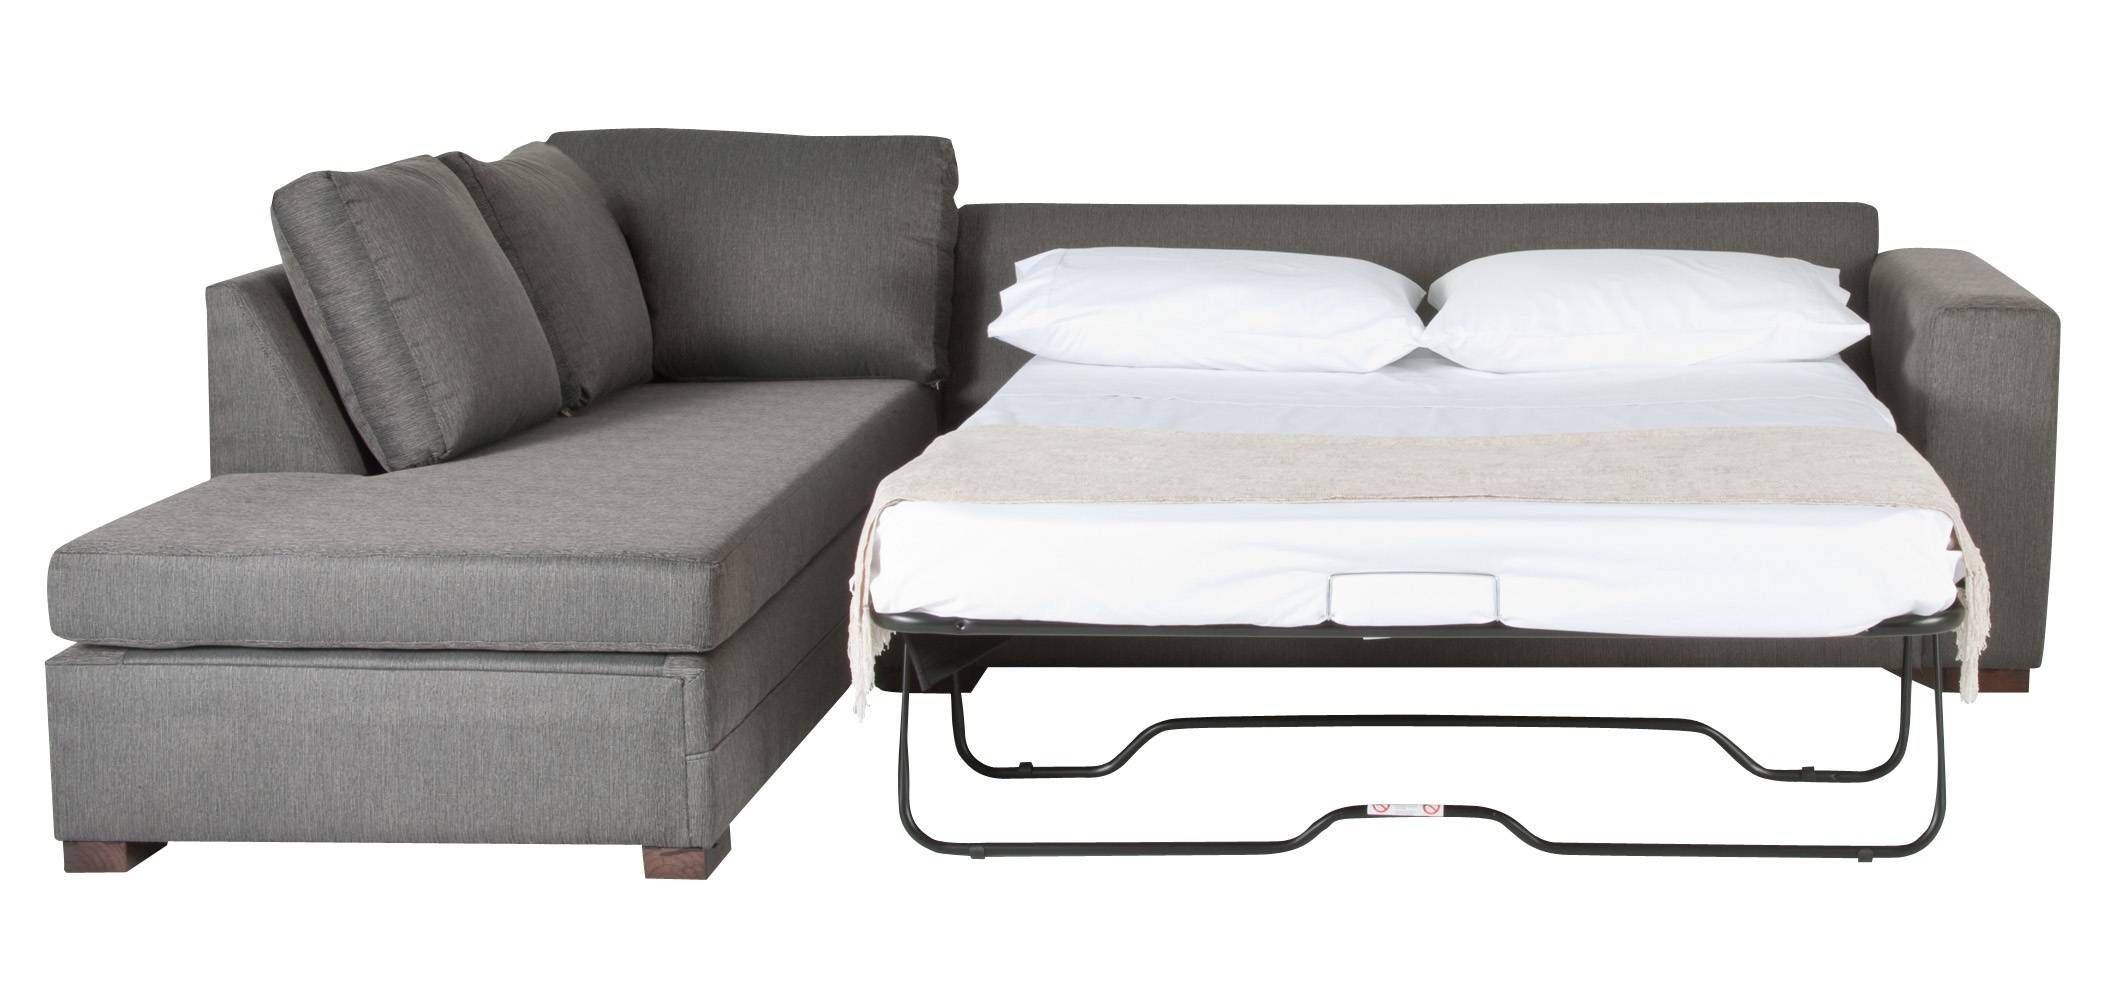 ▻ Sofa : 2 Good Queen Size Pull Out Sofa Bed 77 For Your Pull Out Within Pull Out Queen Size Bed Sofas (Photo 1 of 30)